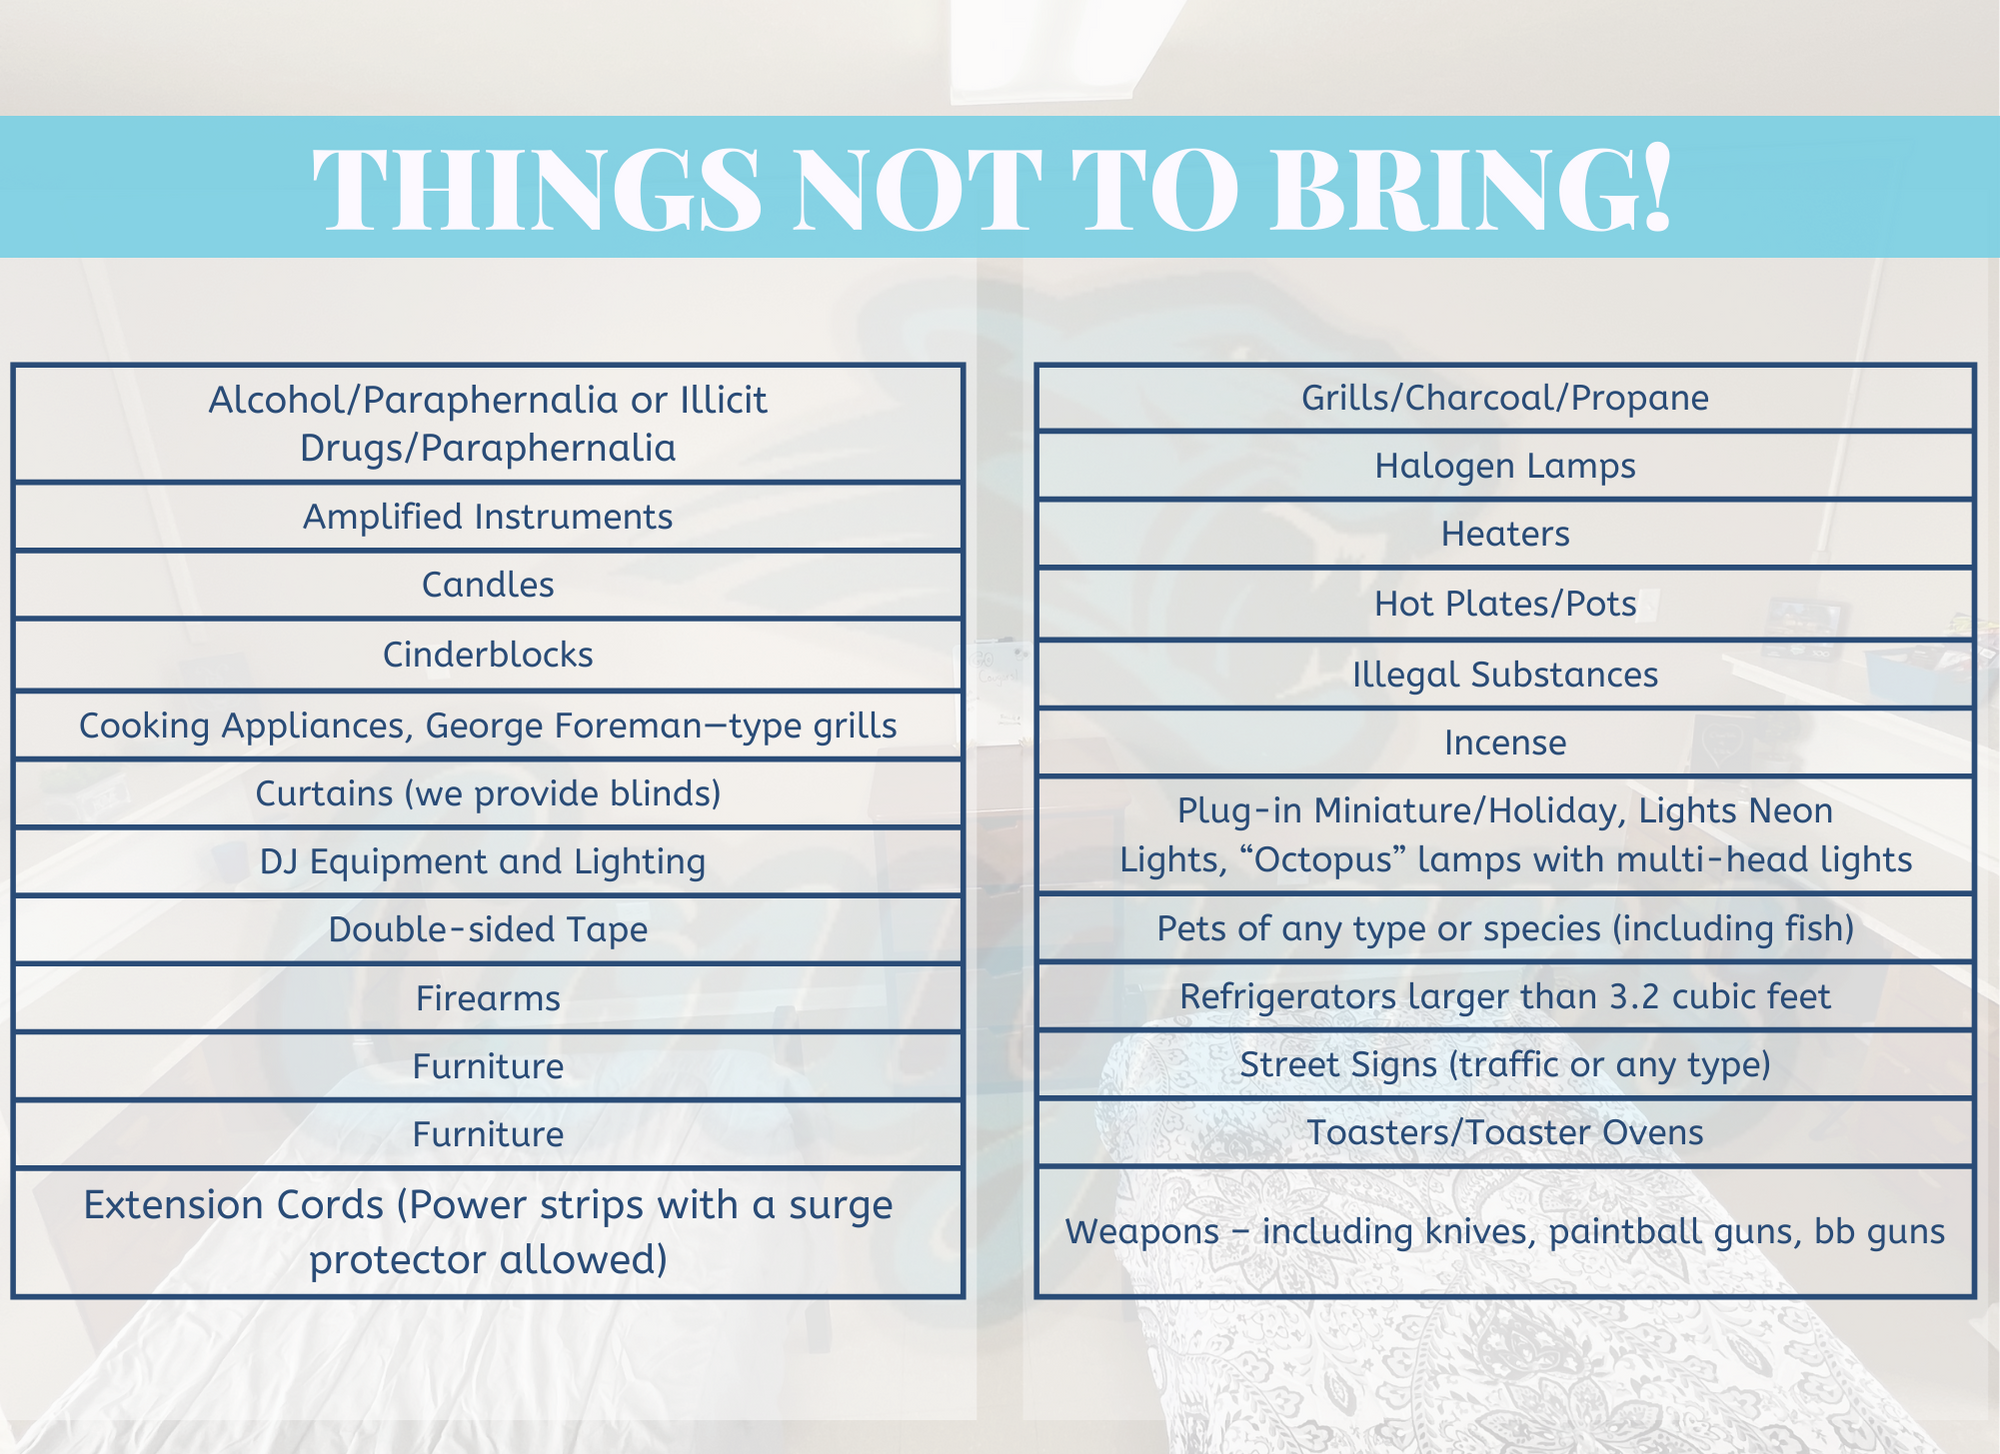 Things Not to Bring